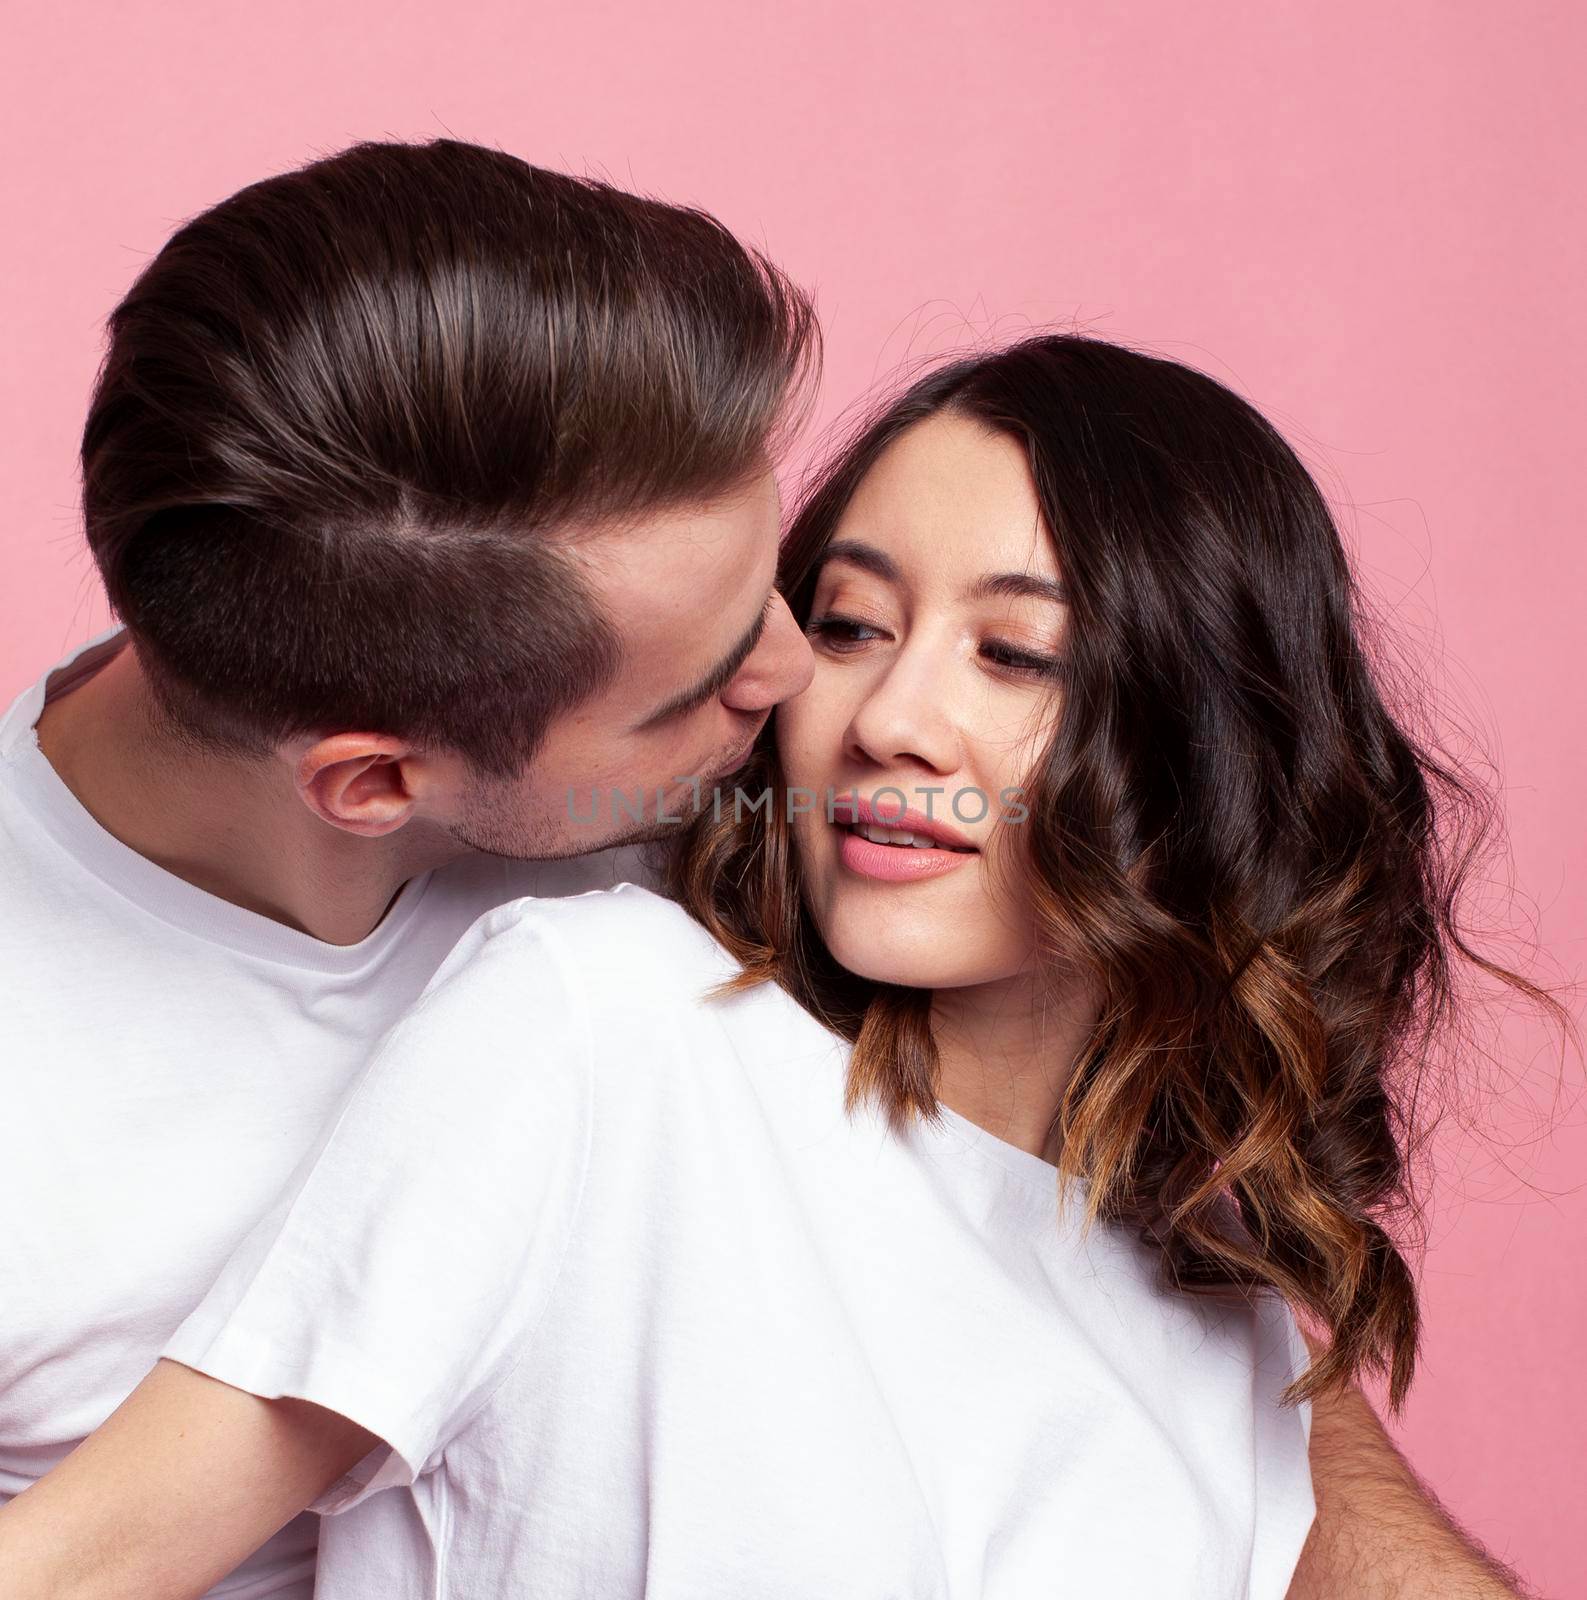 young cheerful caucasian couple together having fun on pink background, guy ang girl modern relationship, lifestyle people concept by JordanJ